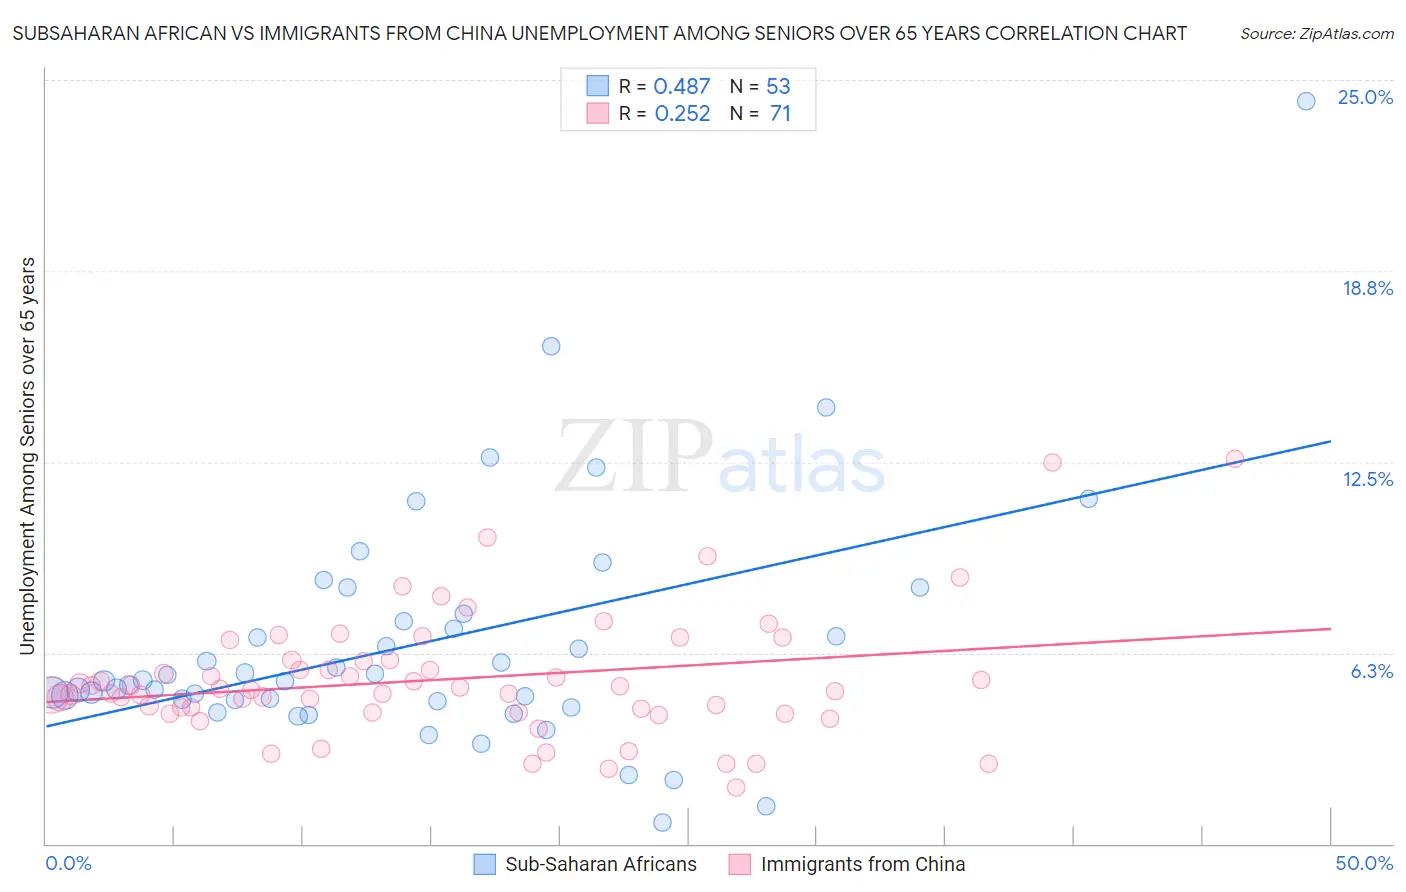 Subsaharan African vs Immigrants from China Unemployment Among Seniors over 65 years